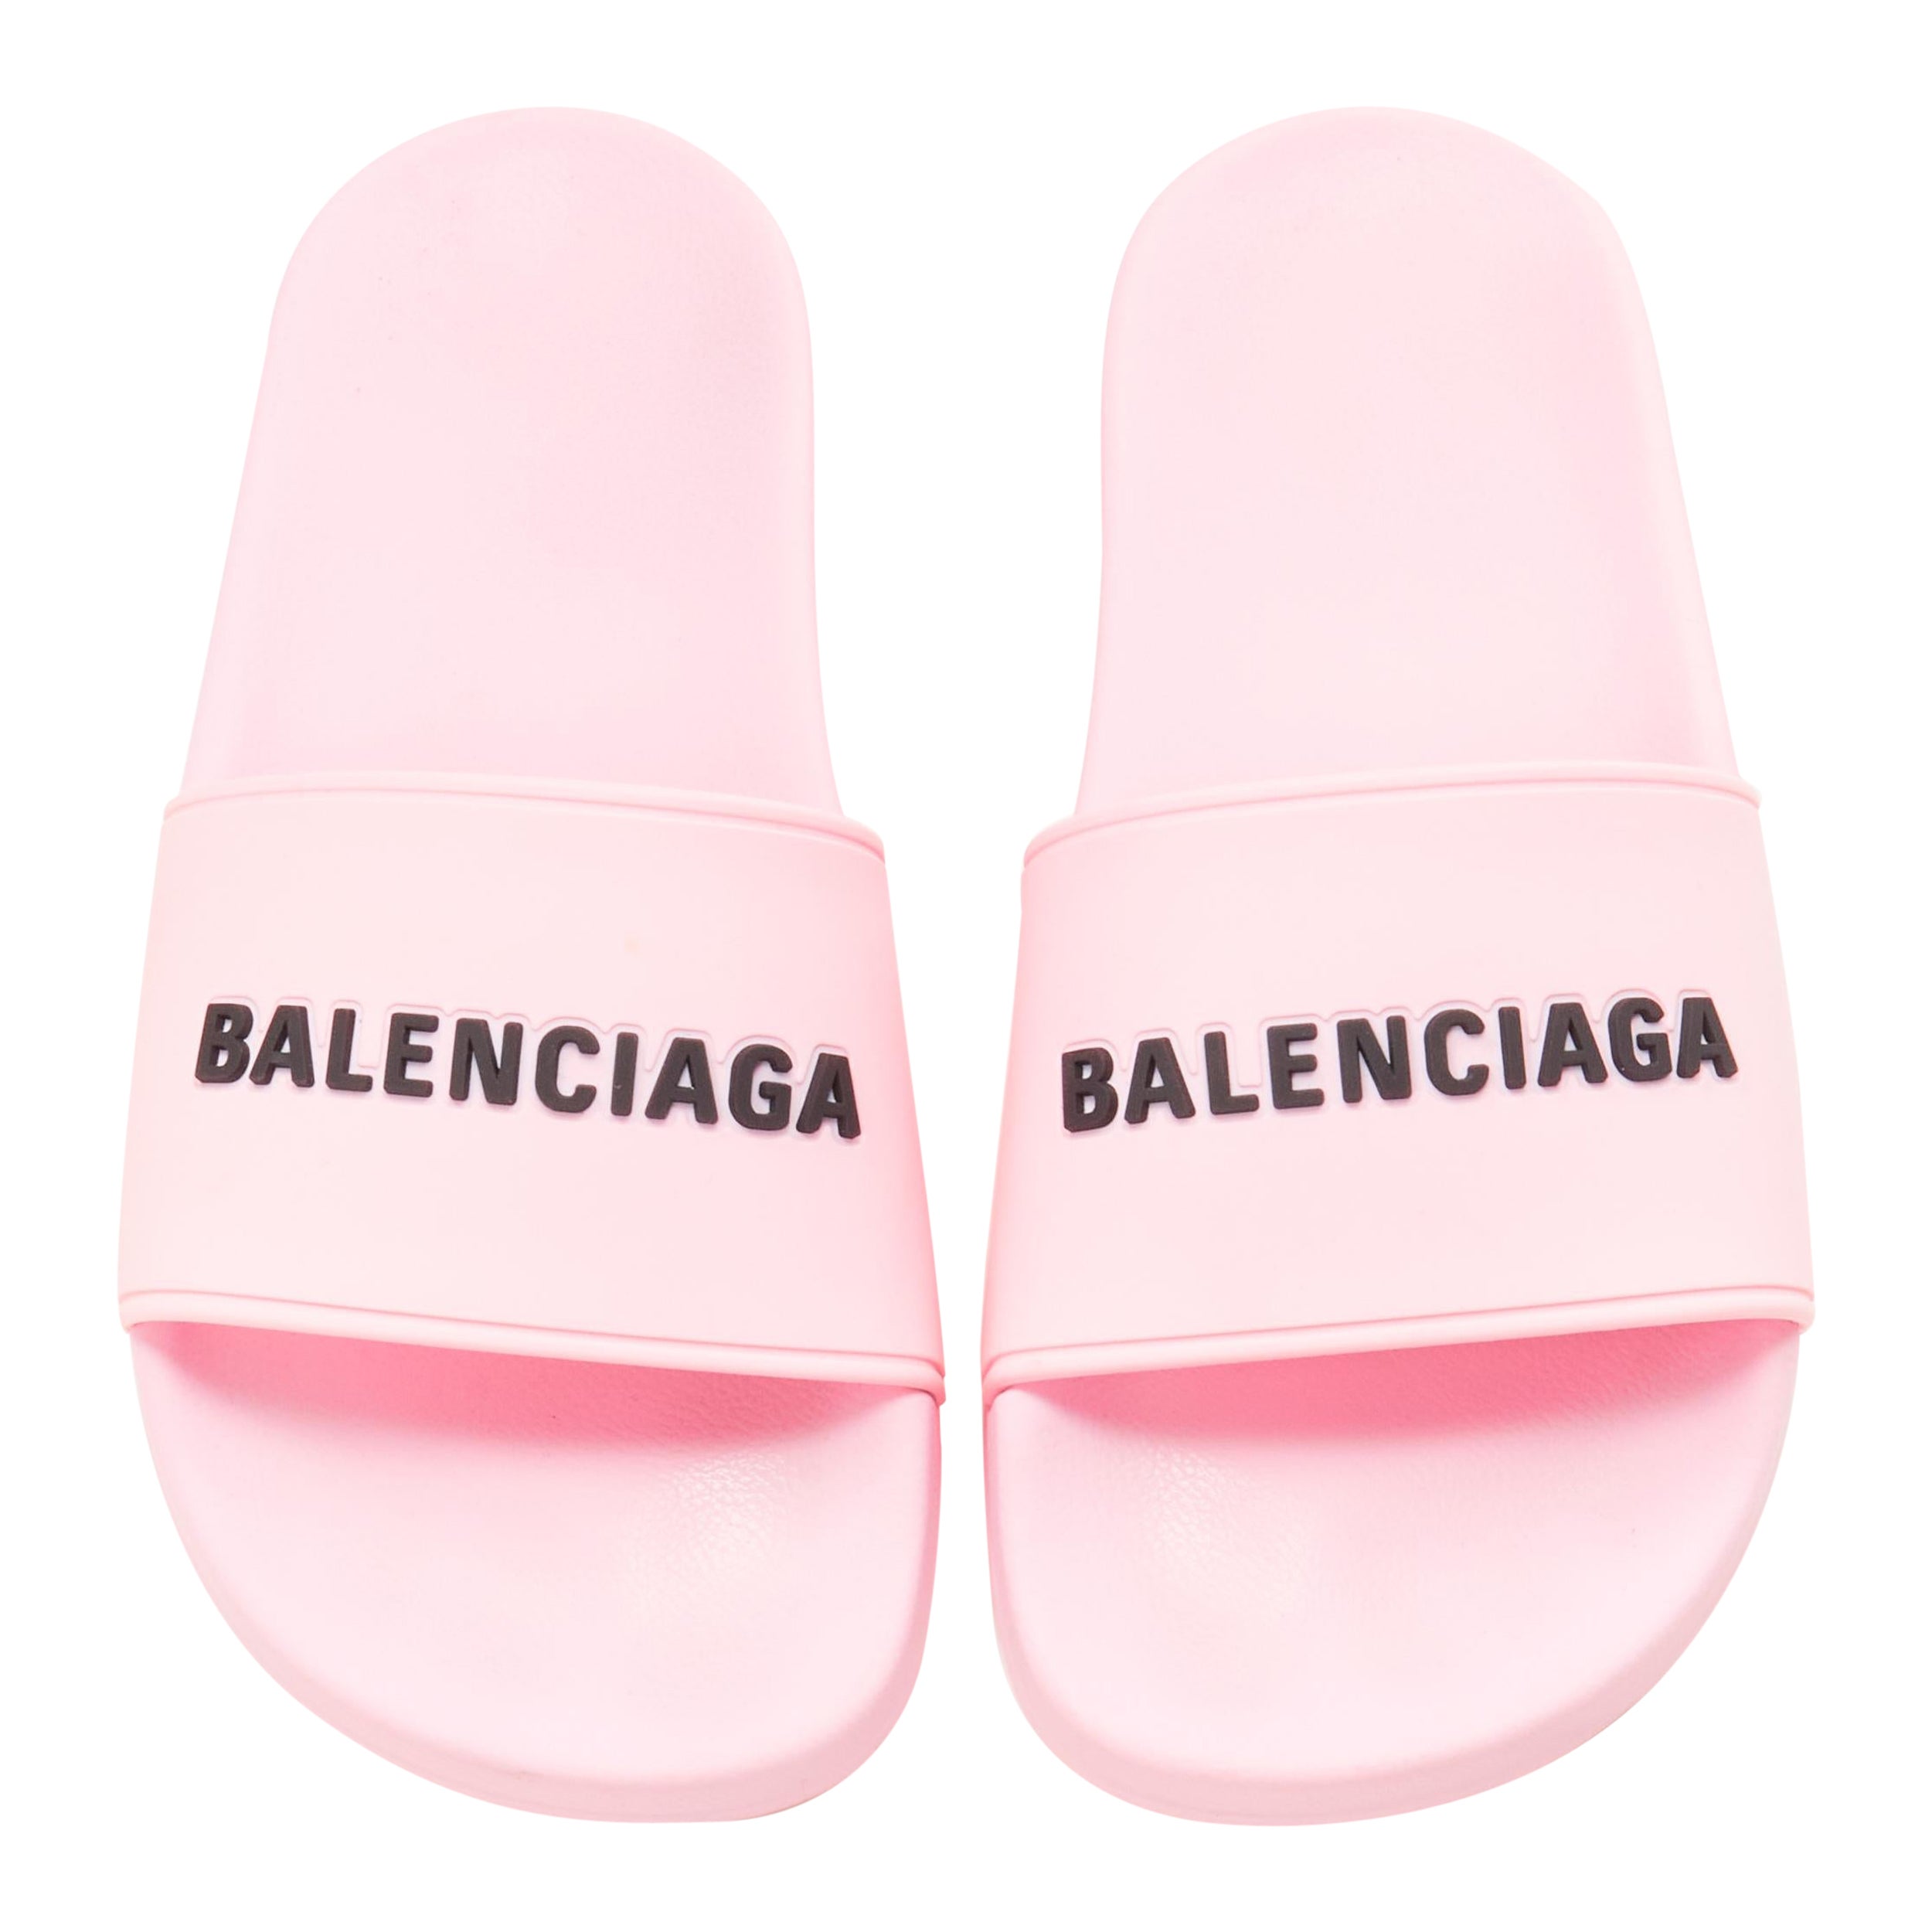 Balenciaga Shoes Pink And Black - 6 For Sale on 1stDibs